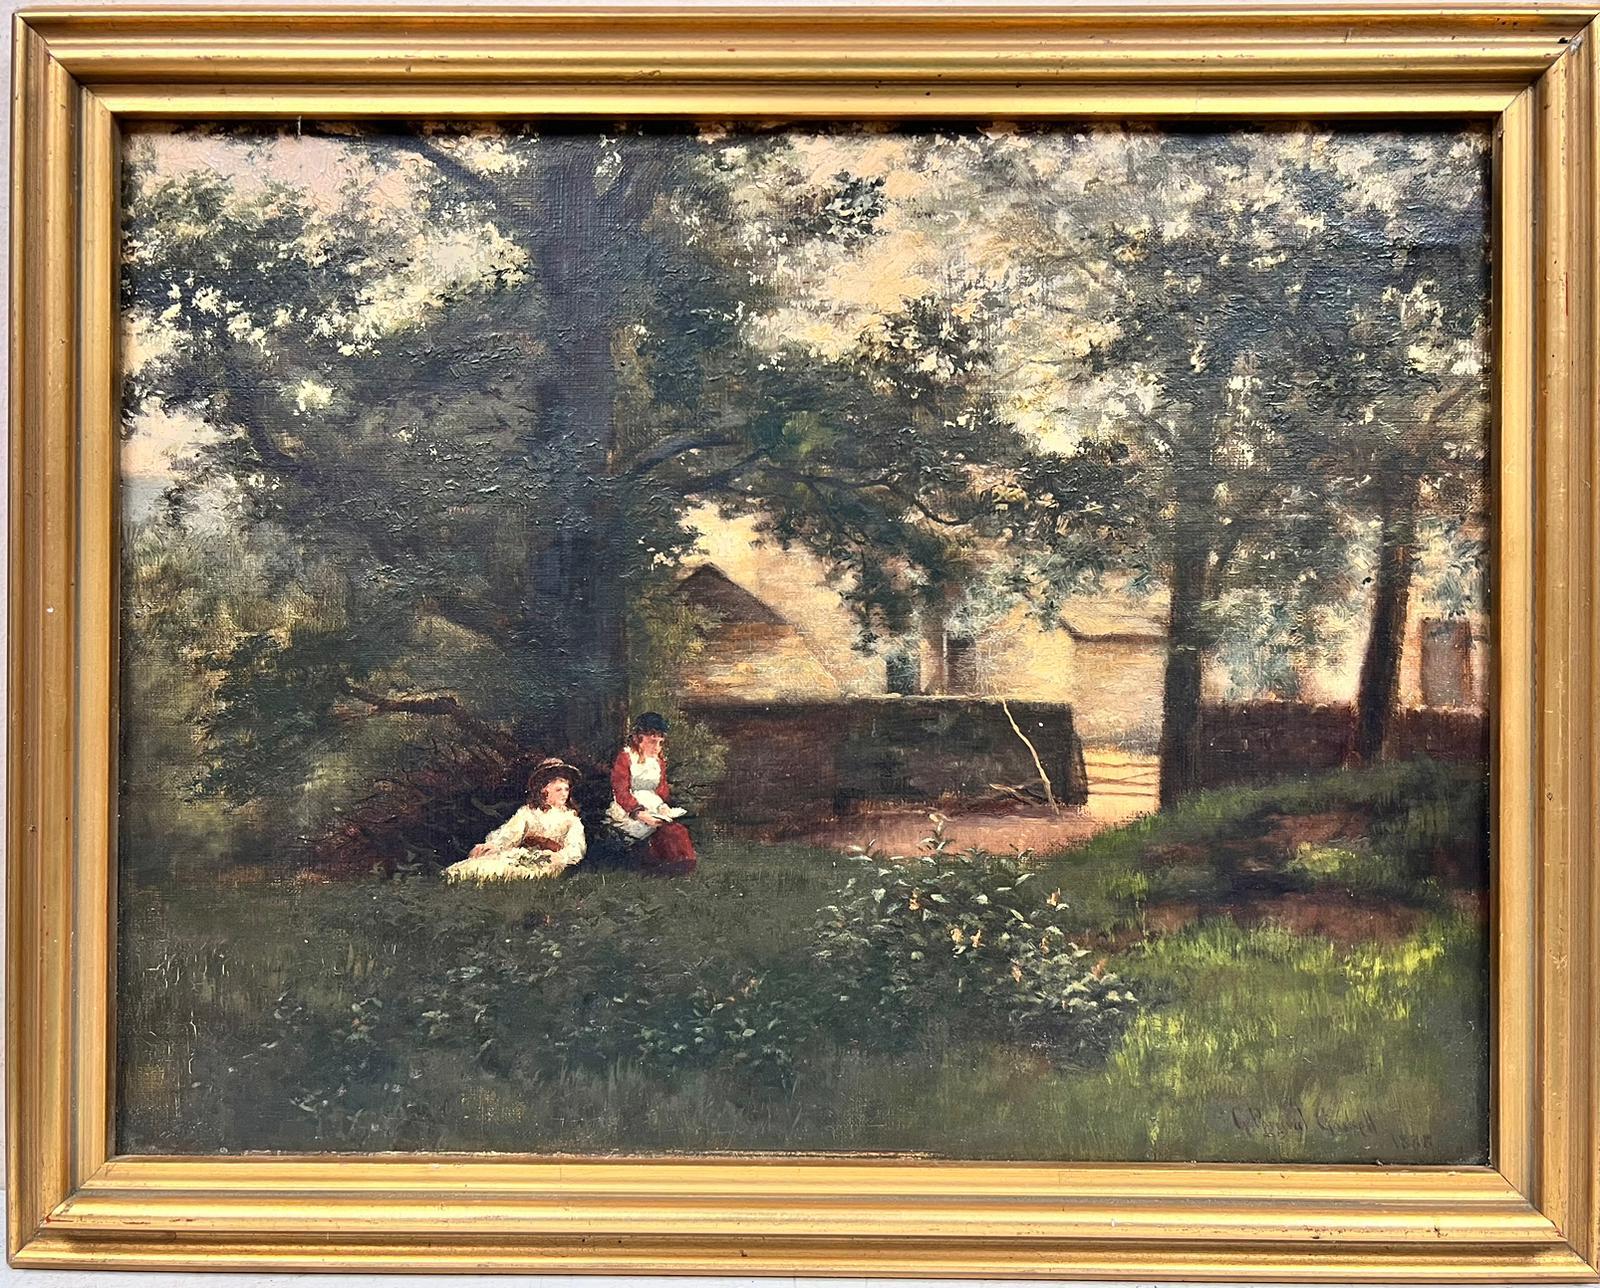 English School, 19th century 
signed oil painting on canvas, framed
dated 1888
framed: 16 x 20 inches
canvas: 13 x 17 inches
provenance: private collection, England 
condition: good and sound, a few signs of age